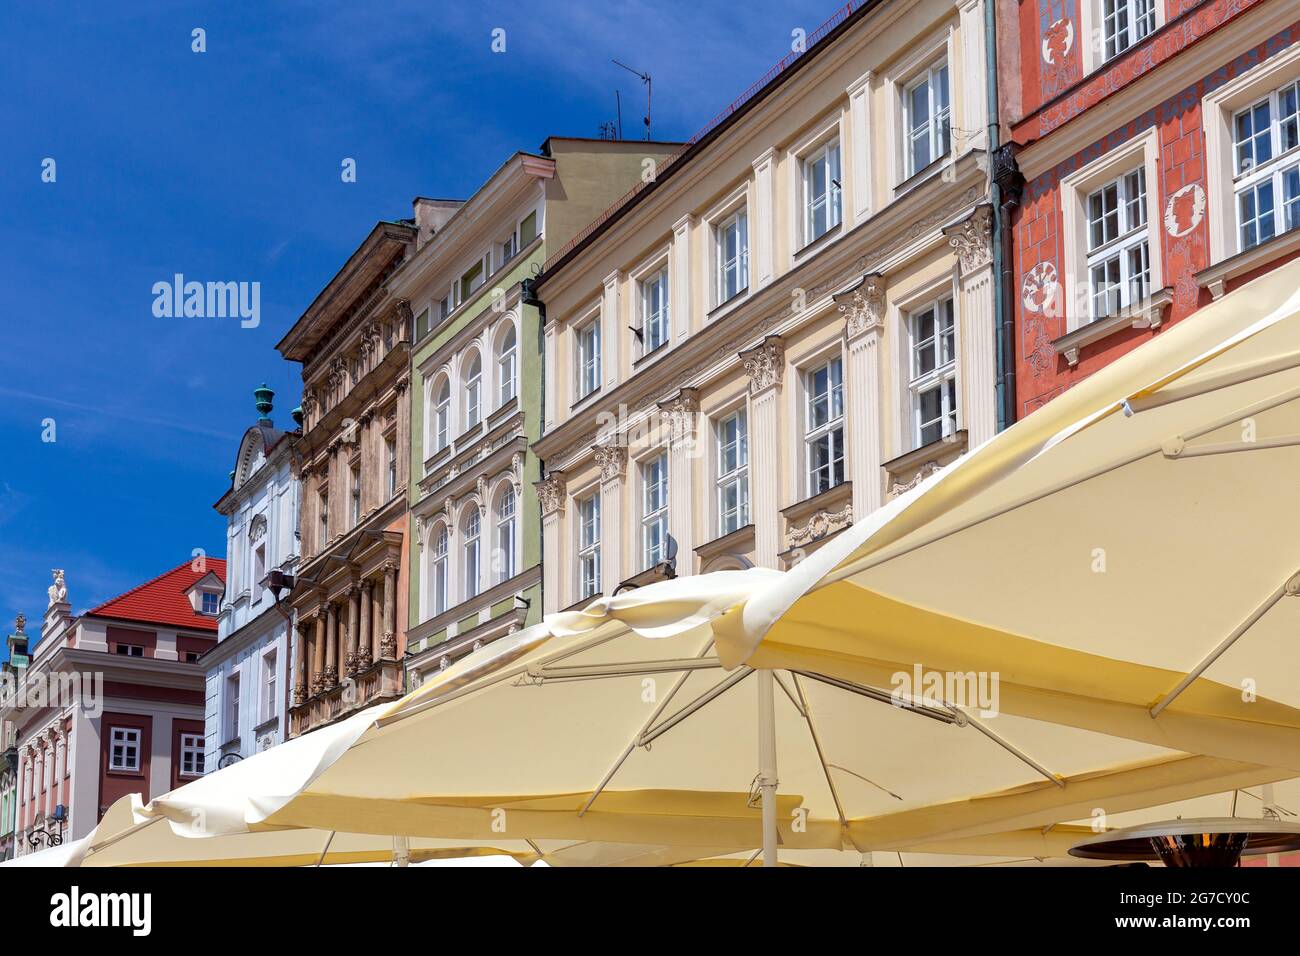 The colorful facades of medieval houses in the market square on a sunny day. Poznan Poland. Stock Photo